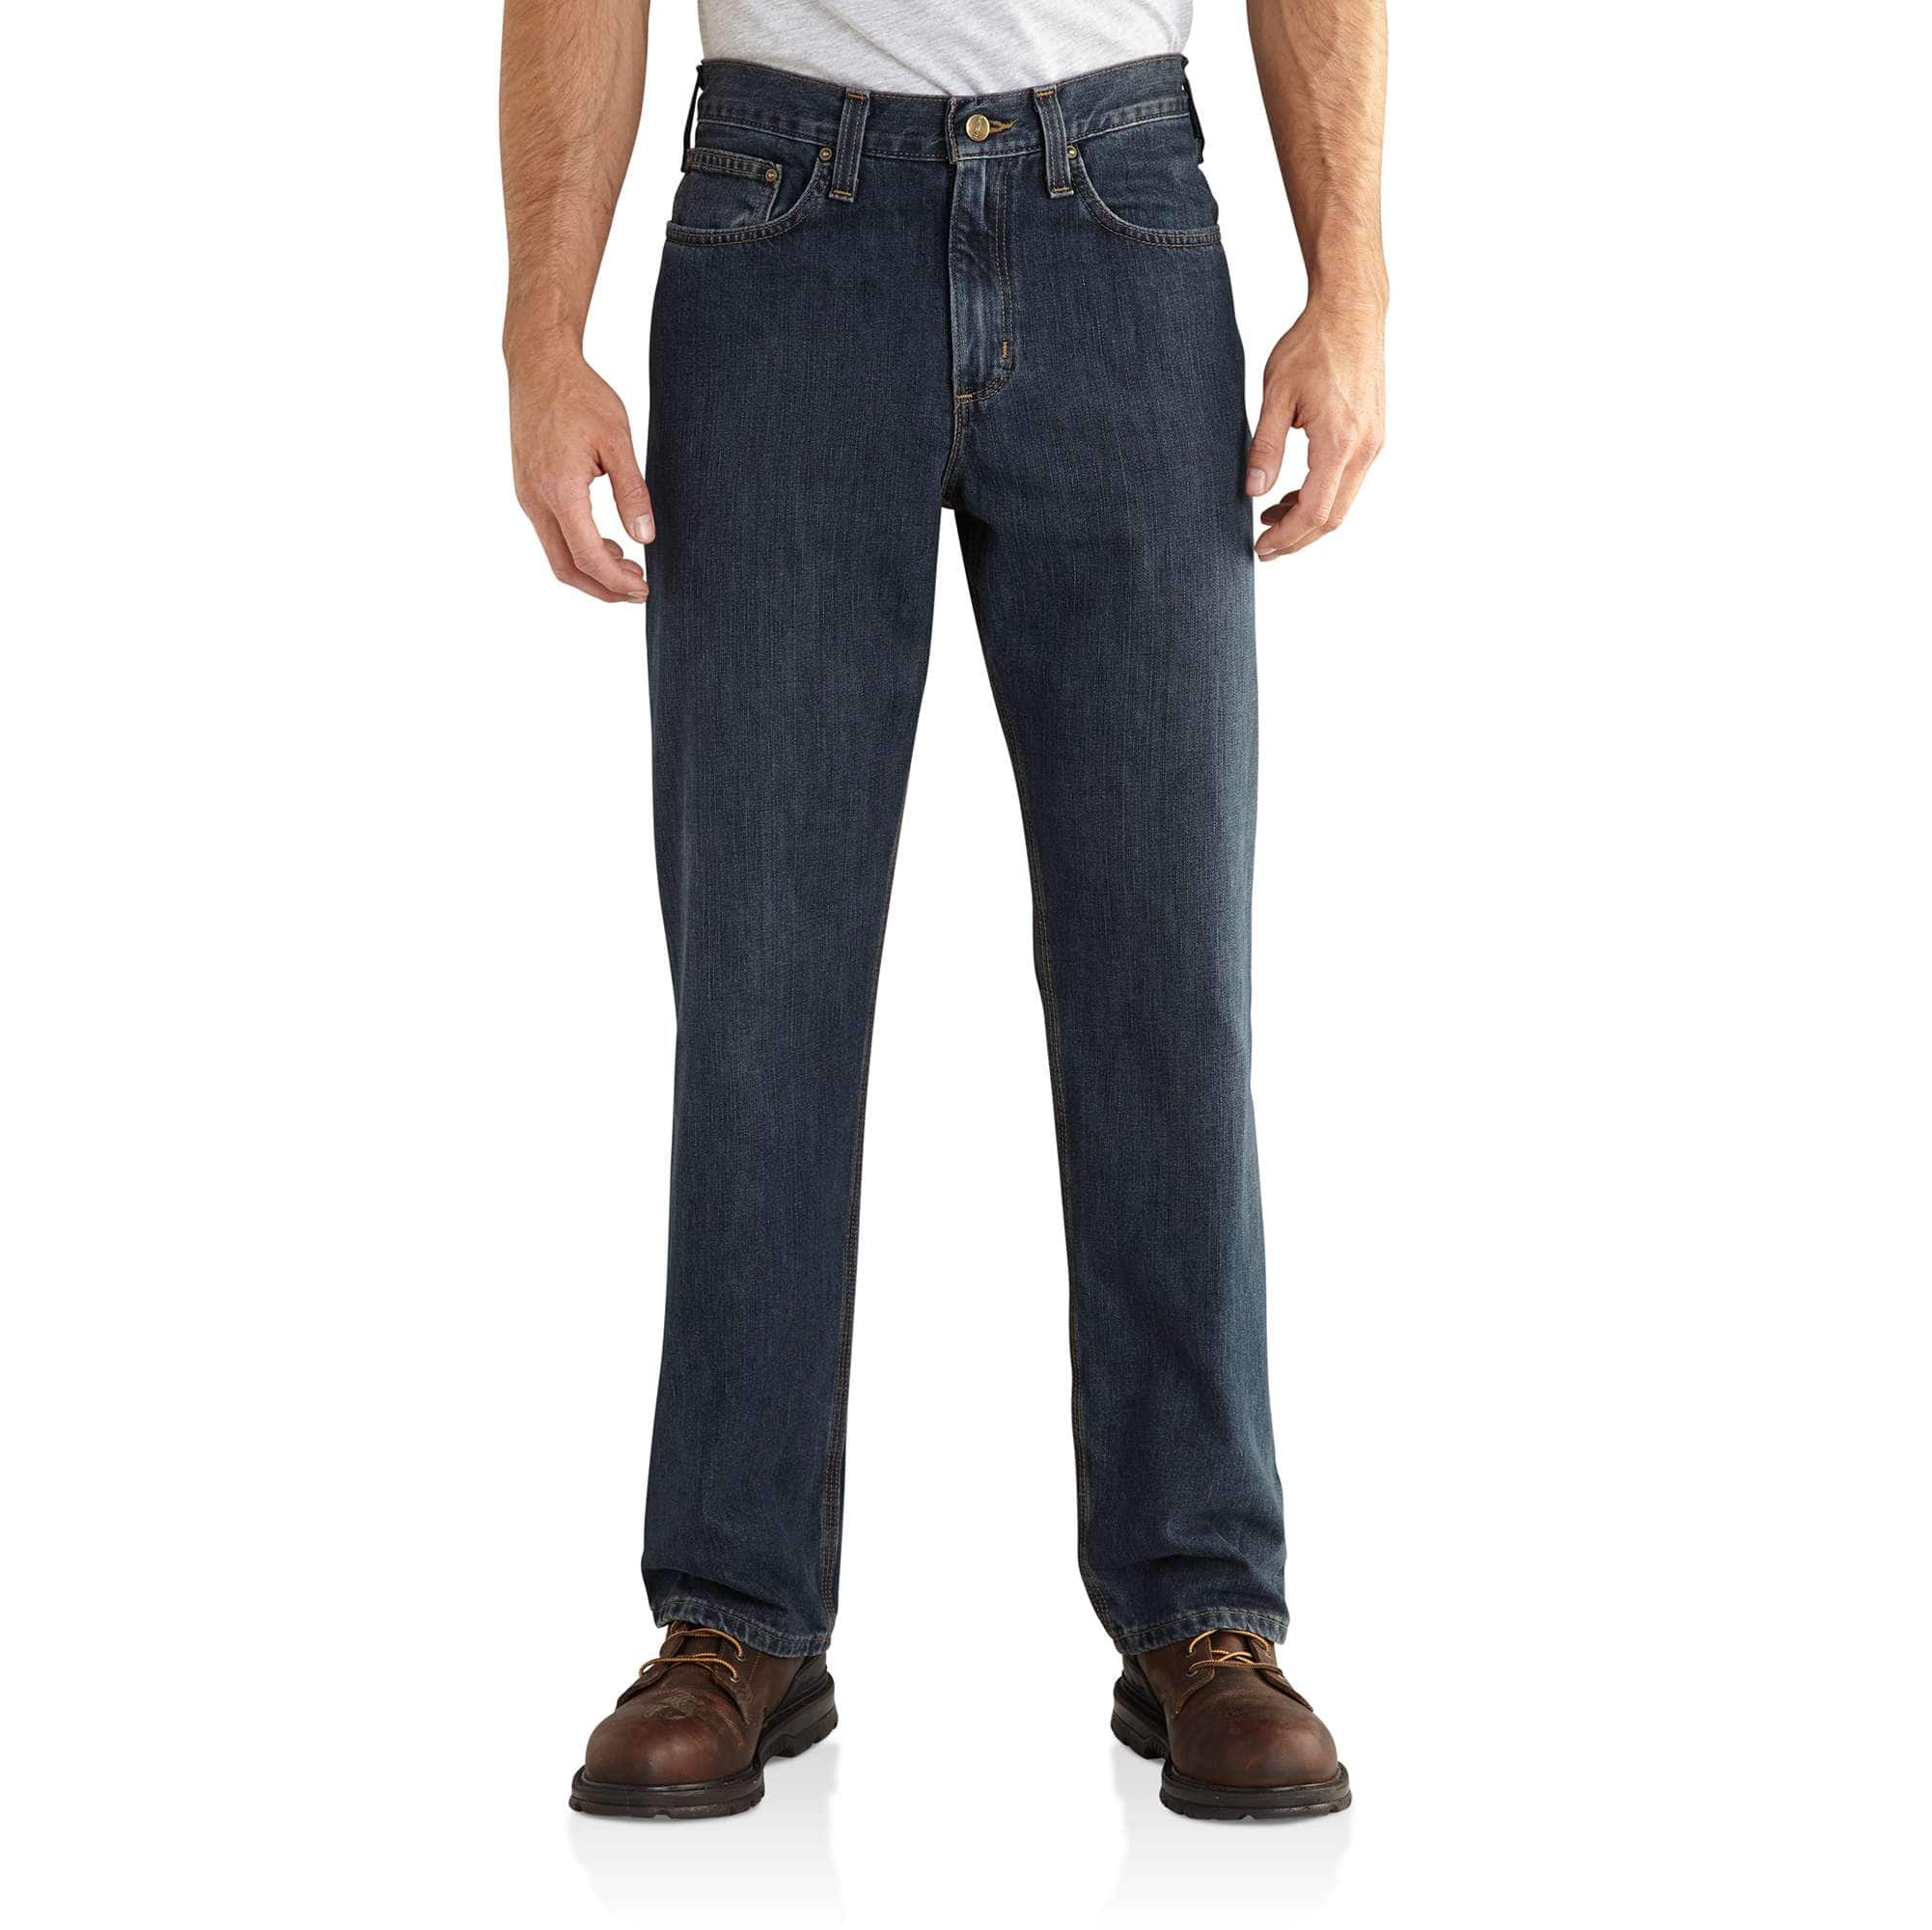 Men's Relaxed Fit Holter Jean 101483 